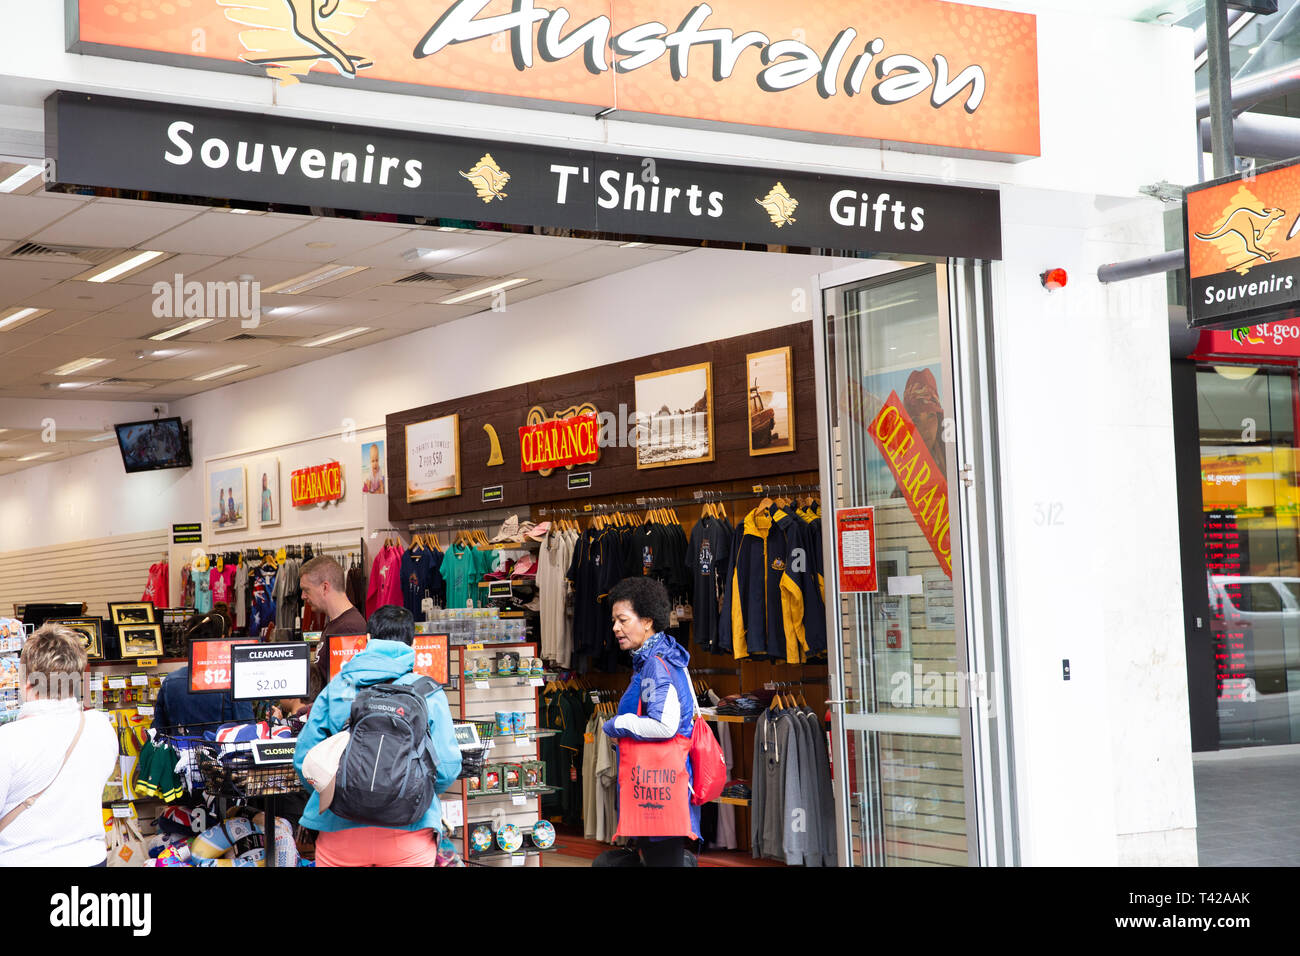 Australian souvenirs and gift shop in George street, Sydney city centre,New South Wales,Australia Stock Photo